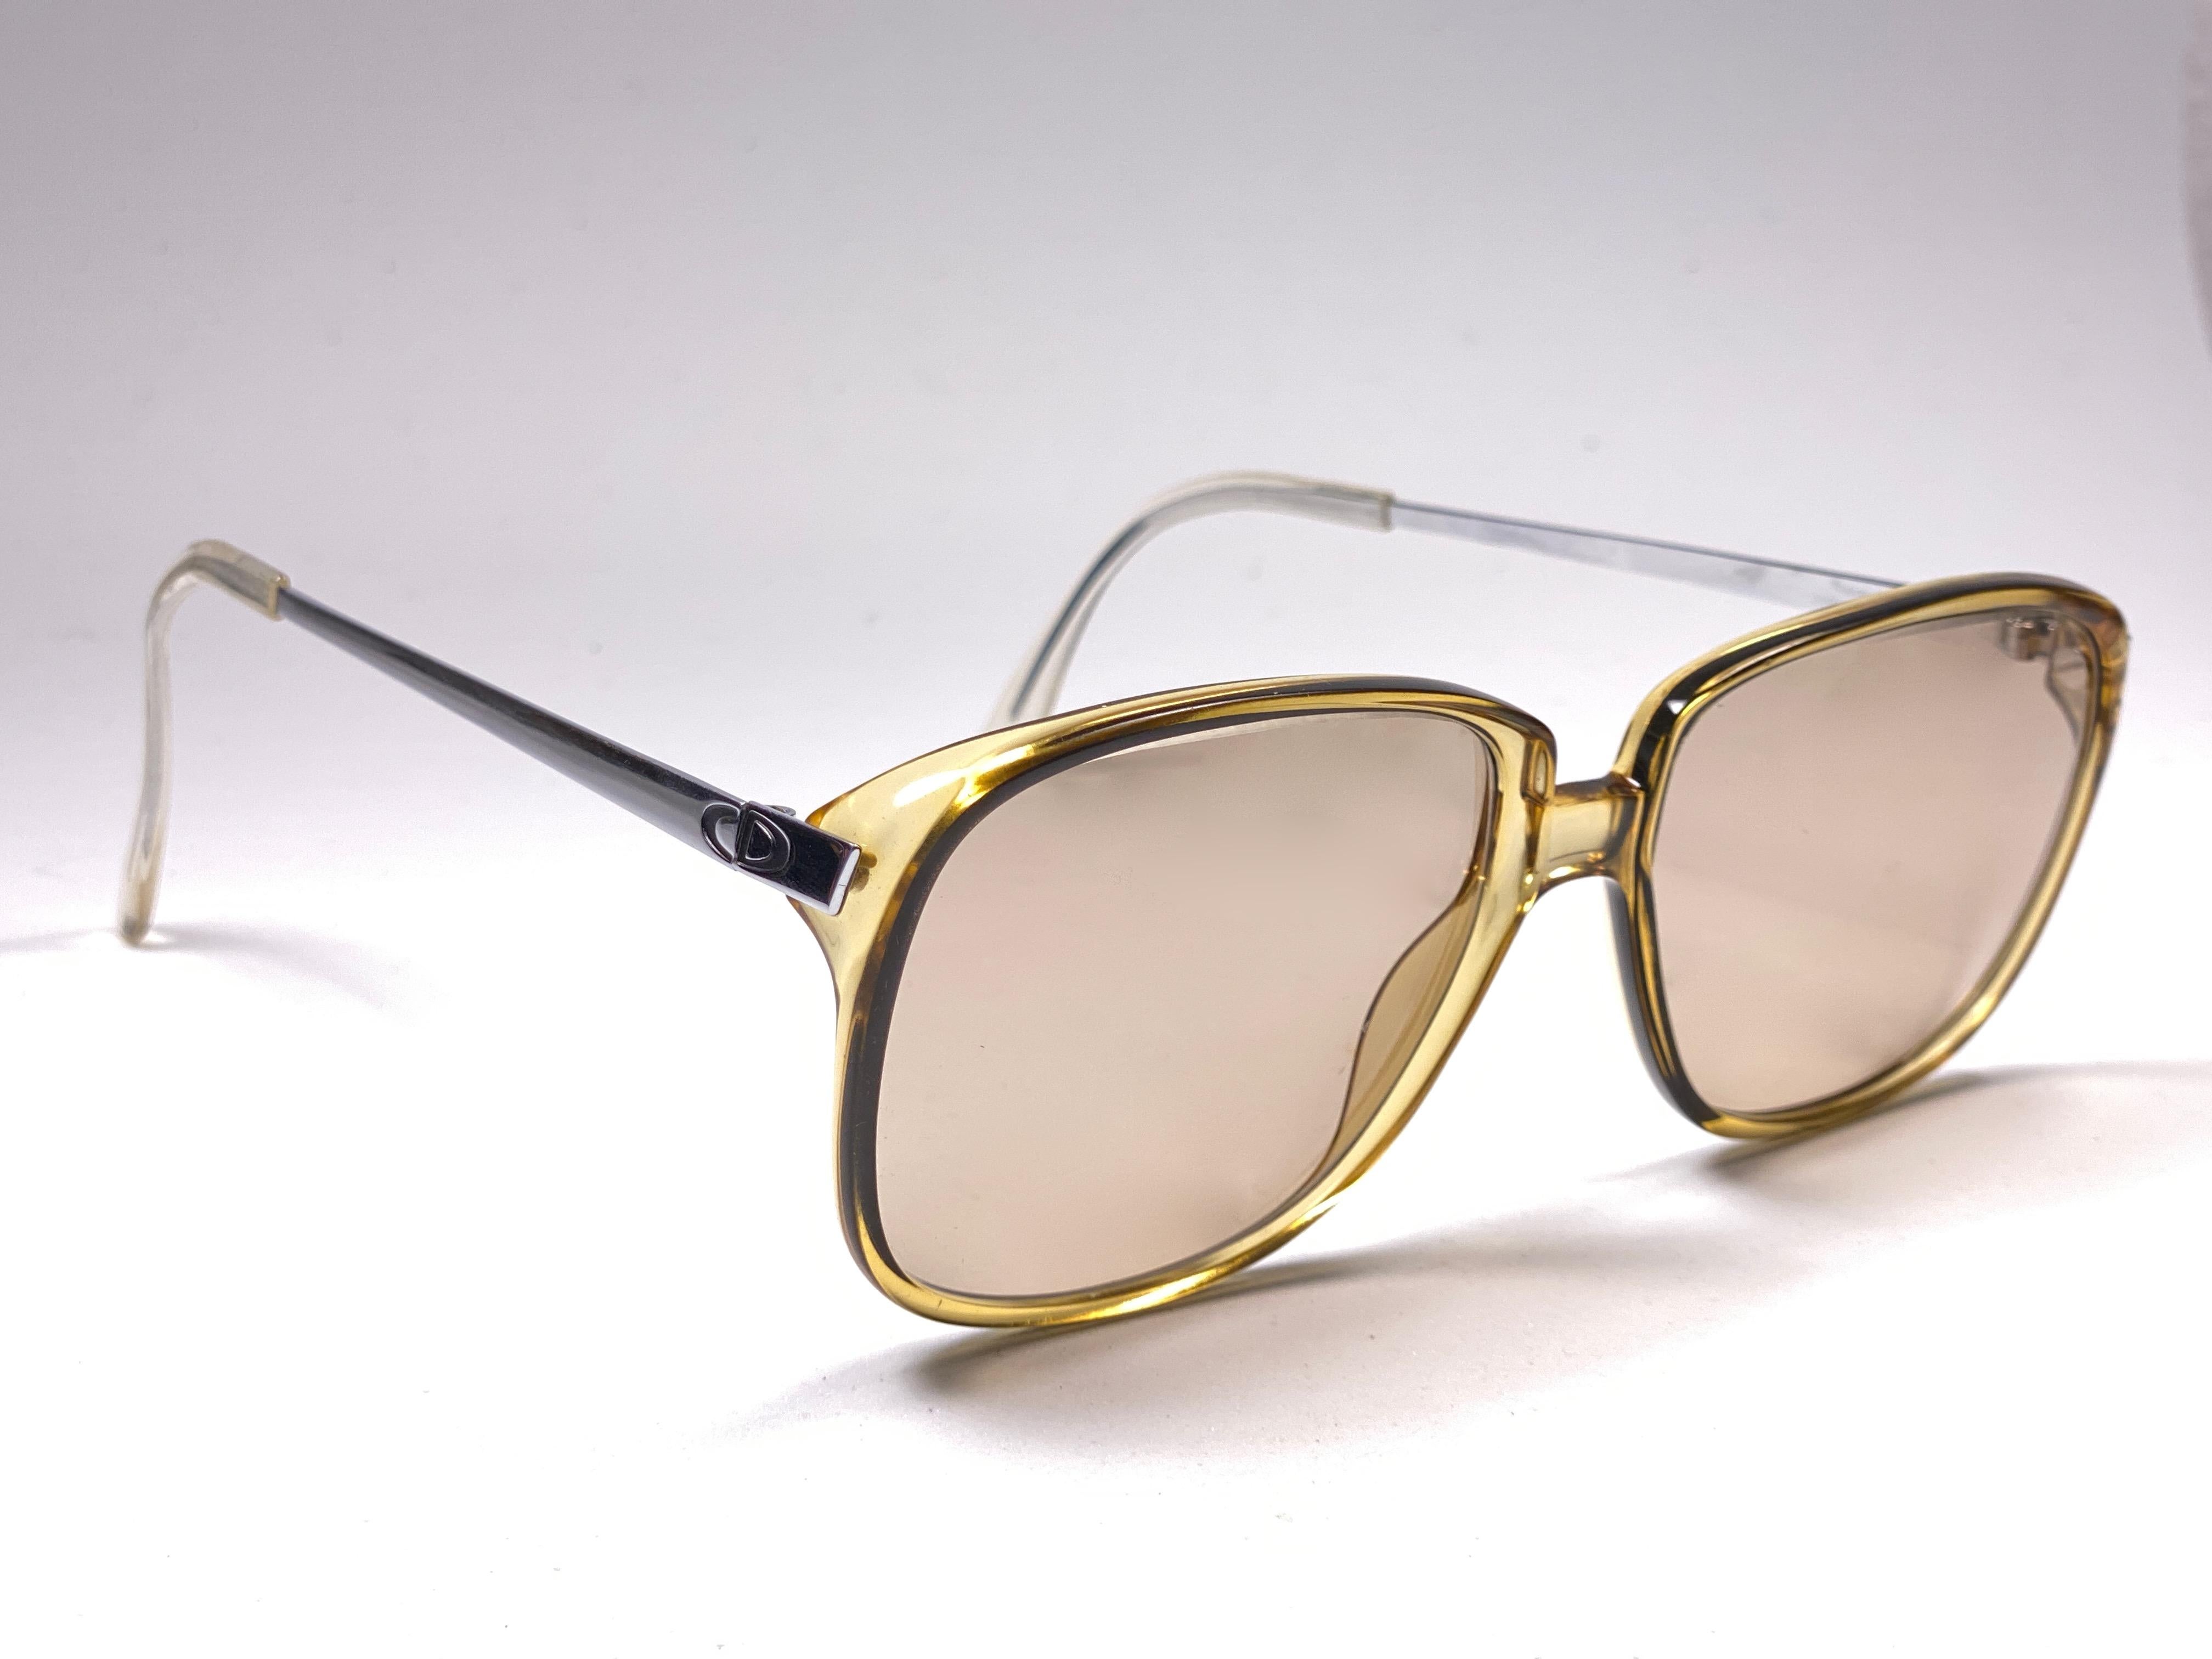 New vintage Christian Dior Monsieur translucent oversized sunglasses. .

Spotless medium brown lenses.

New, never worn or displayed this item may show light sign of wear due to storage.

Made in Austria

